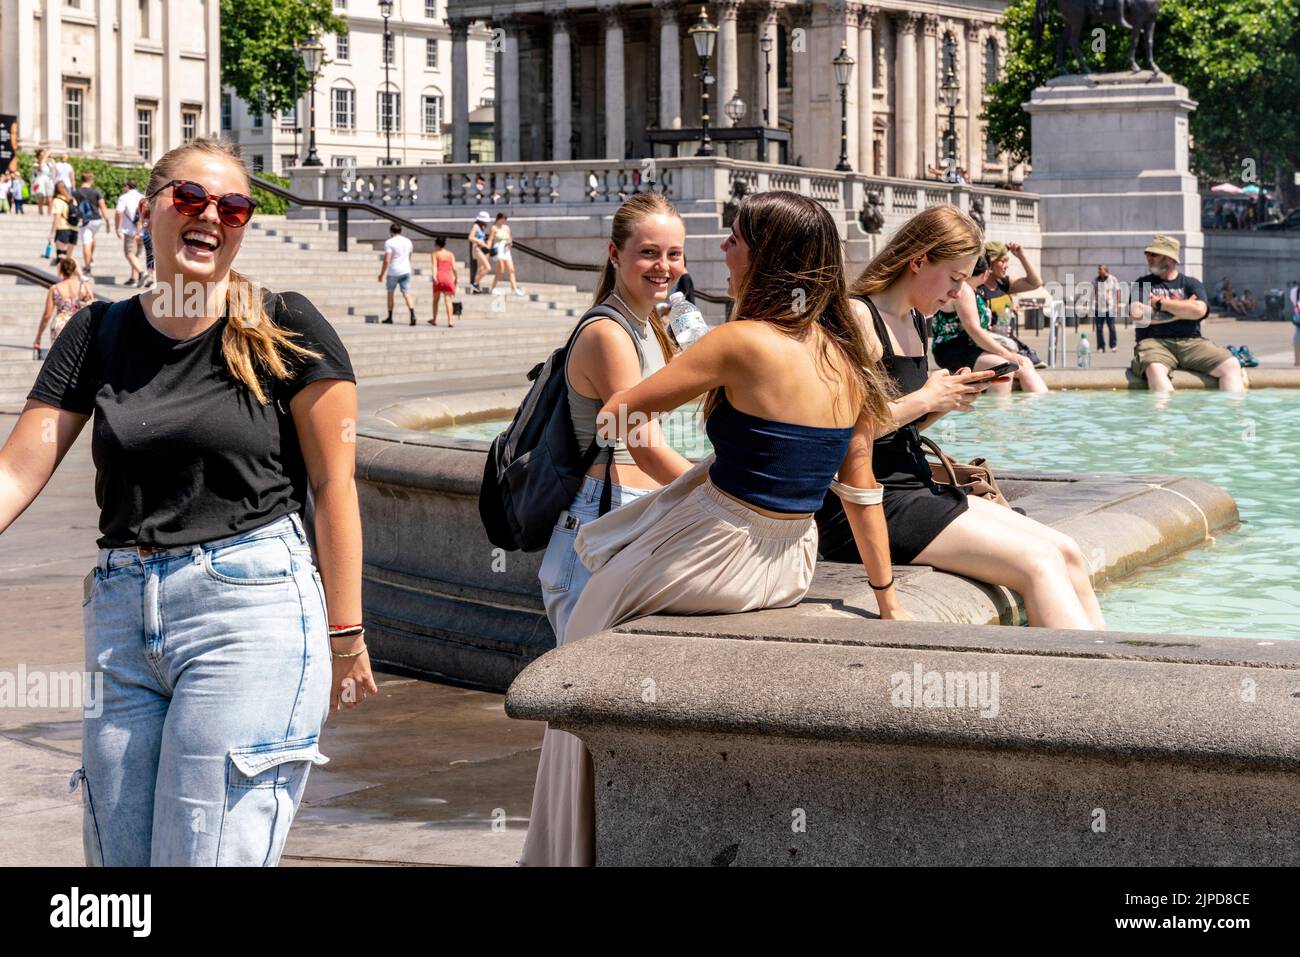 A Group Of Young People Cool Off In The Fountains In Trafalgar Square During The Hottest Day Ever Recorded In The Capital, London, UK. Stock Photo